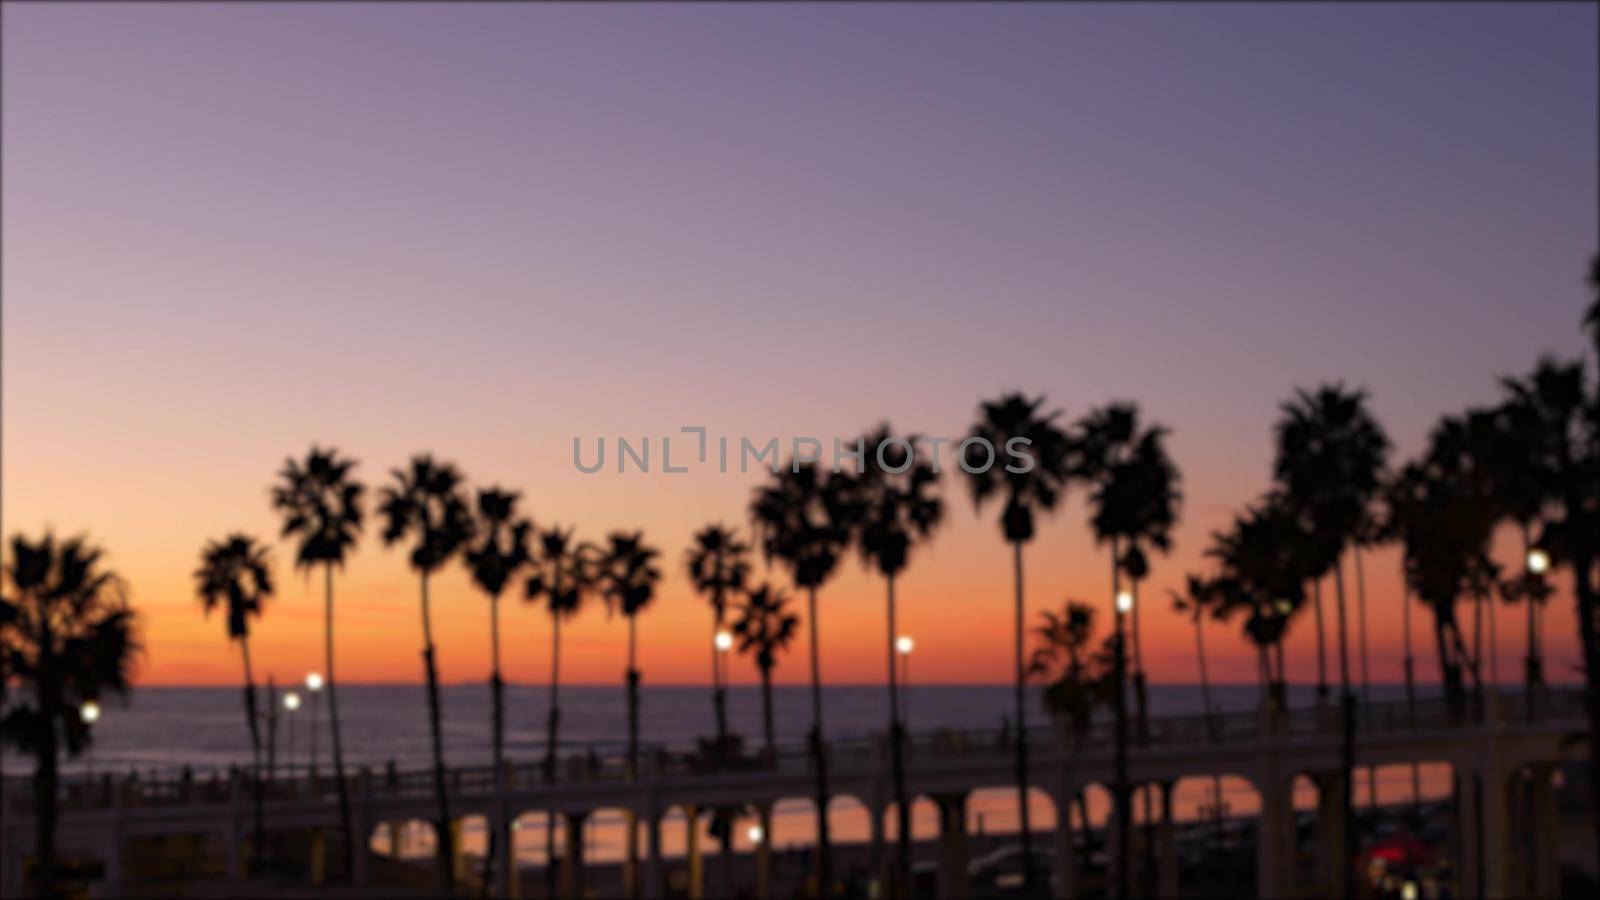 Blurred palms silhouette, twilight sky, California USA, Oceanside pier. Dusk gloaming nightfall atmosphere. Tropical pacific ocean beach, sunset afterglow aesthetic. Dark palm tree, Los Angeles vibes.